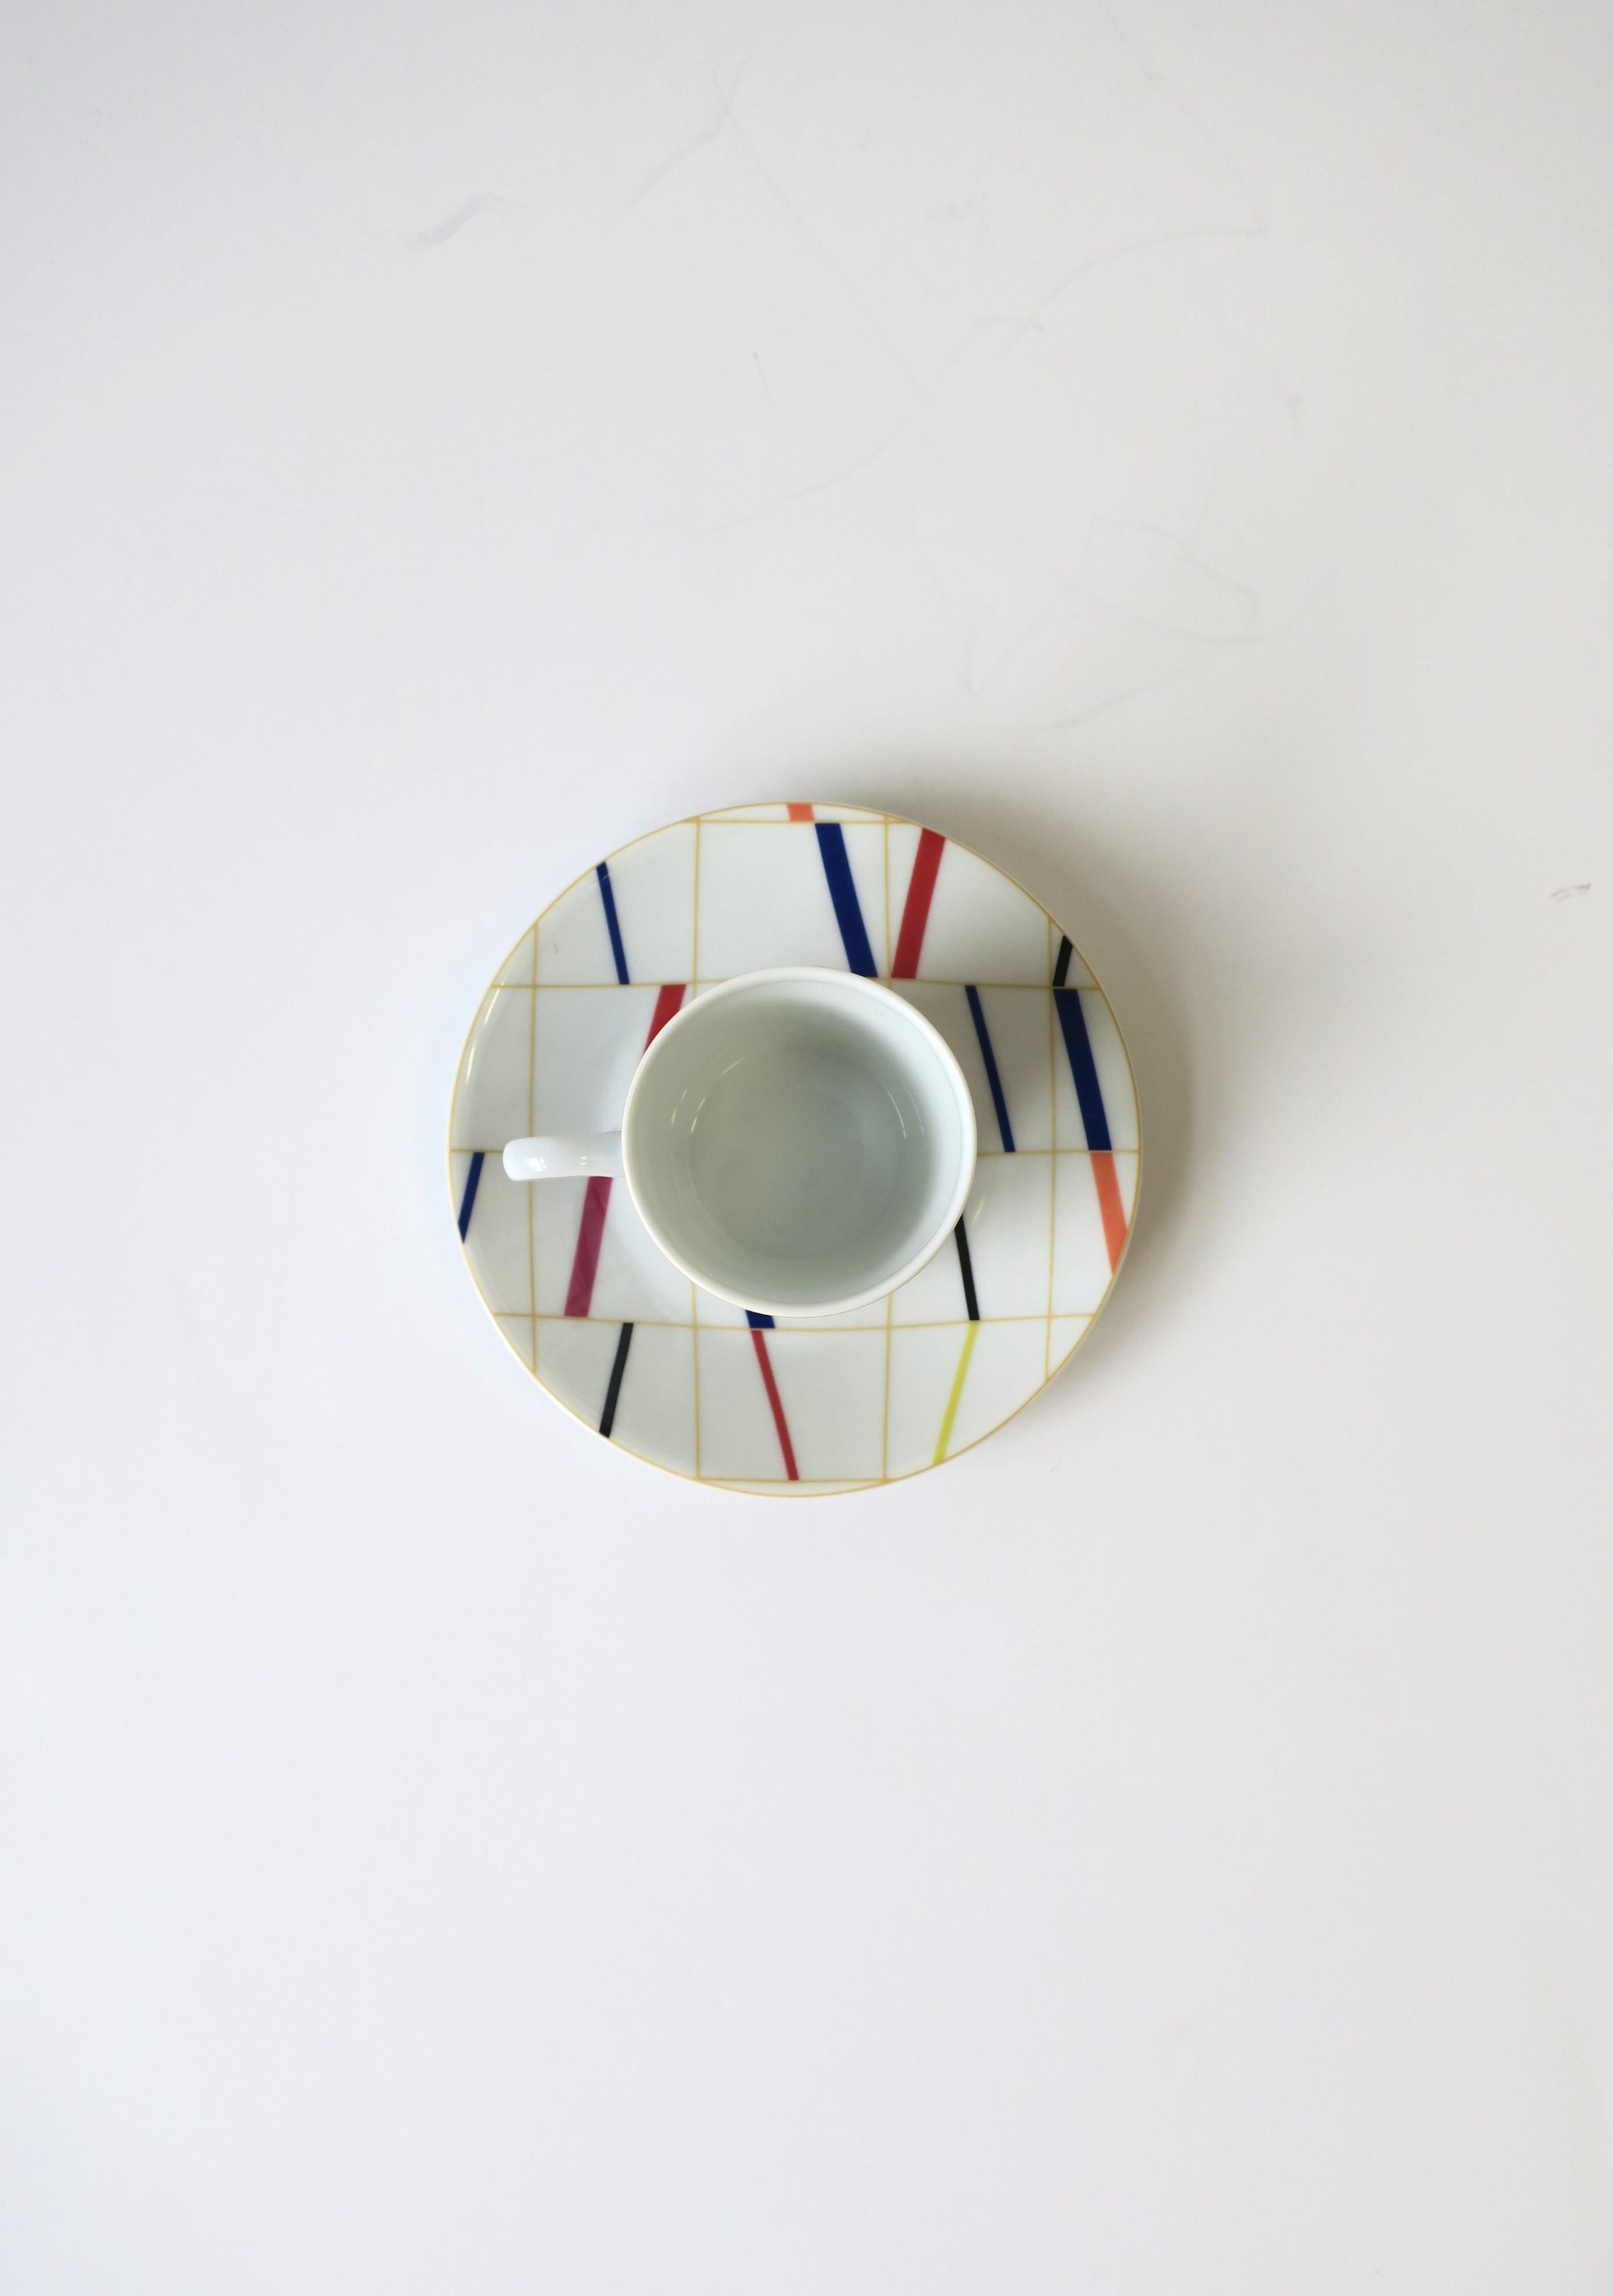 French Porcelain Espresso Coffee or Tea Demitasse Cup Saucer w/Abstract Design In Excellent Condition For Sale In New York, NY